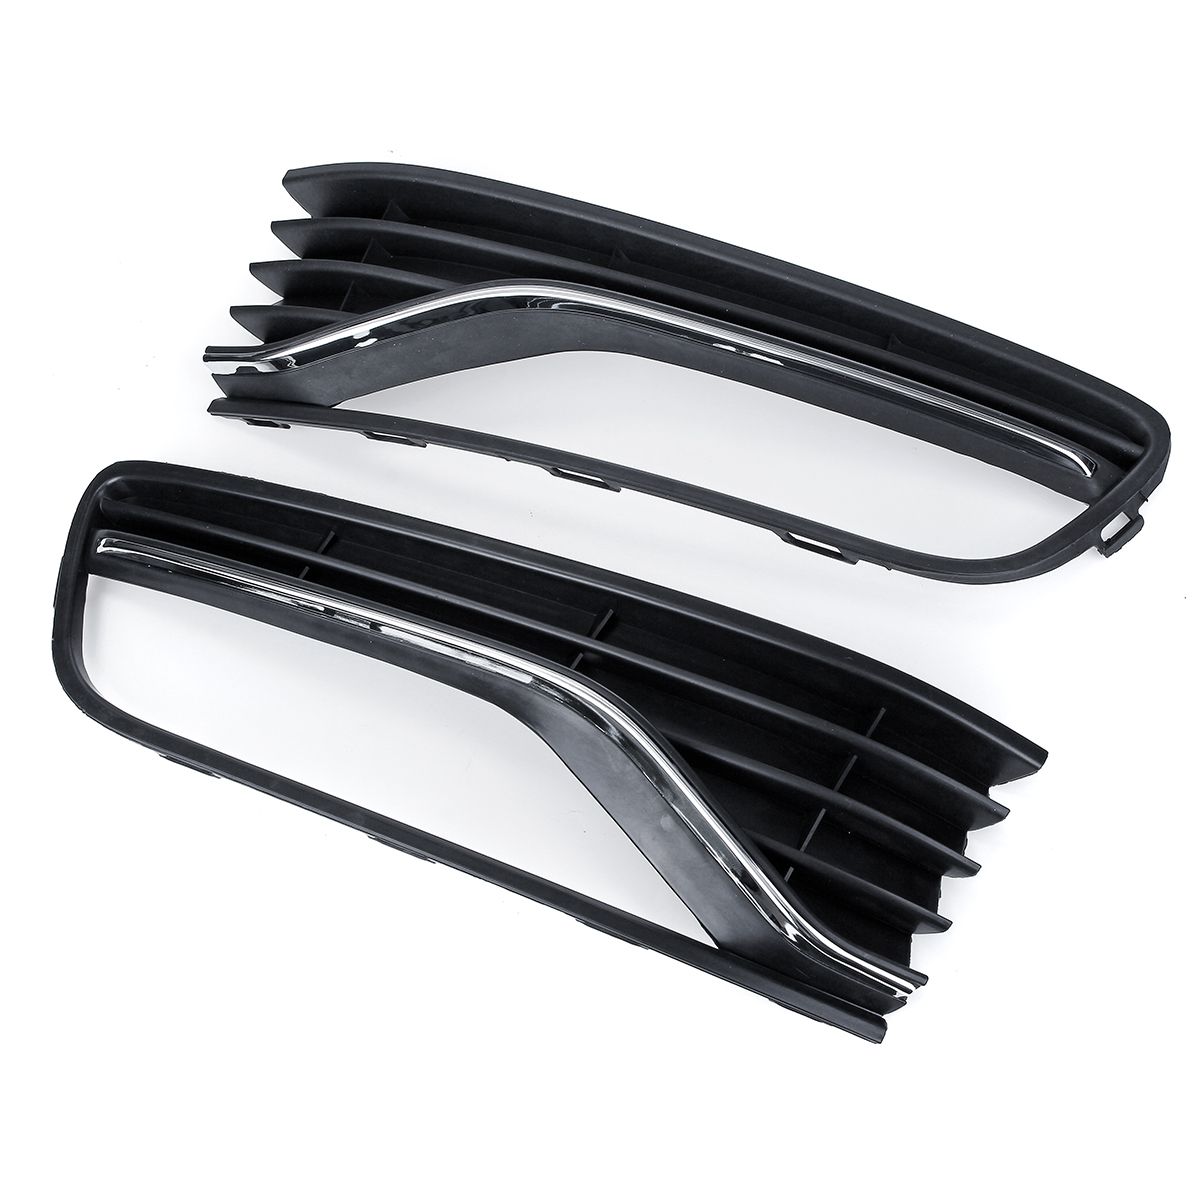 Car-DriverPassenger-Side-Front-Bumper-Fog-Light-Grille-Cover-Trim-Without-Hole-For-VW-POLO-6R6C-2014-1673834